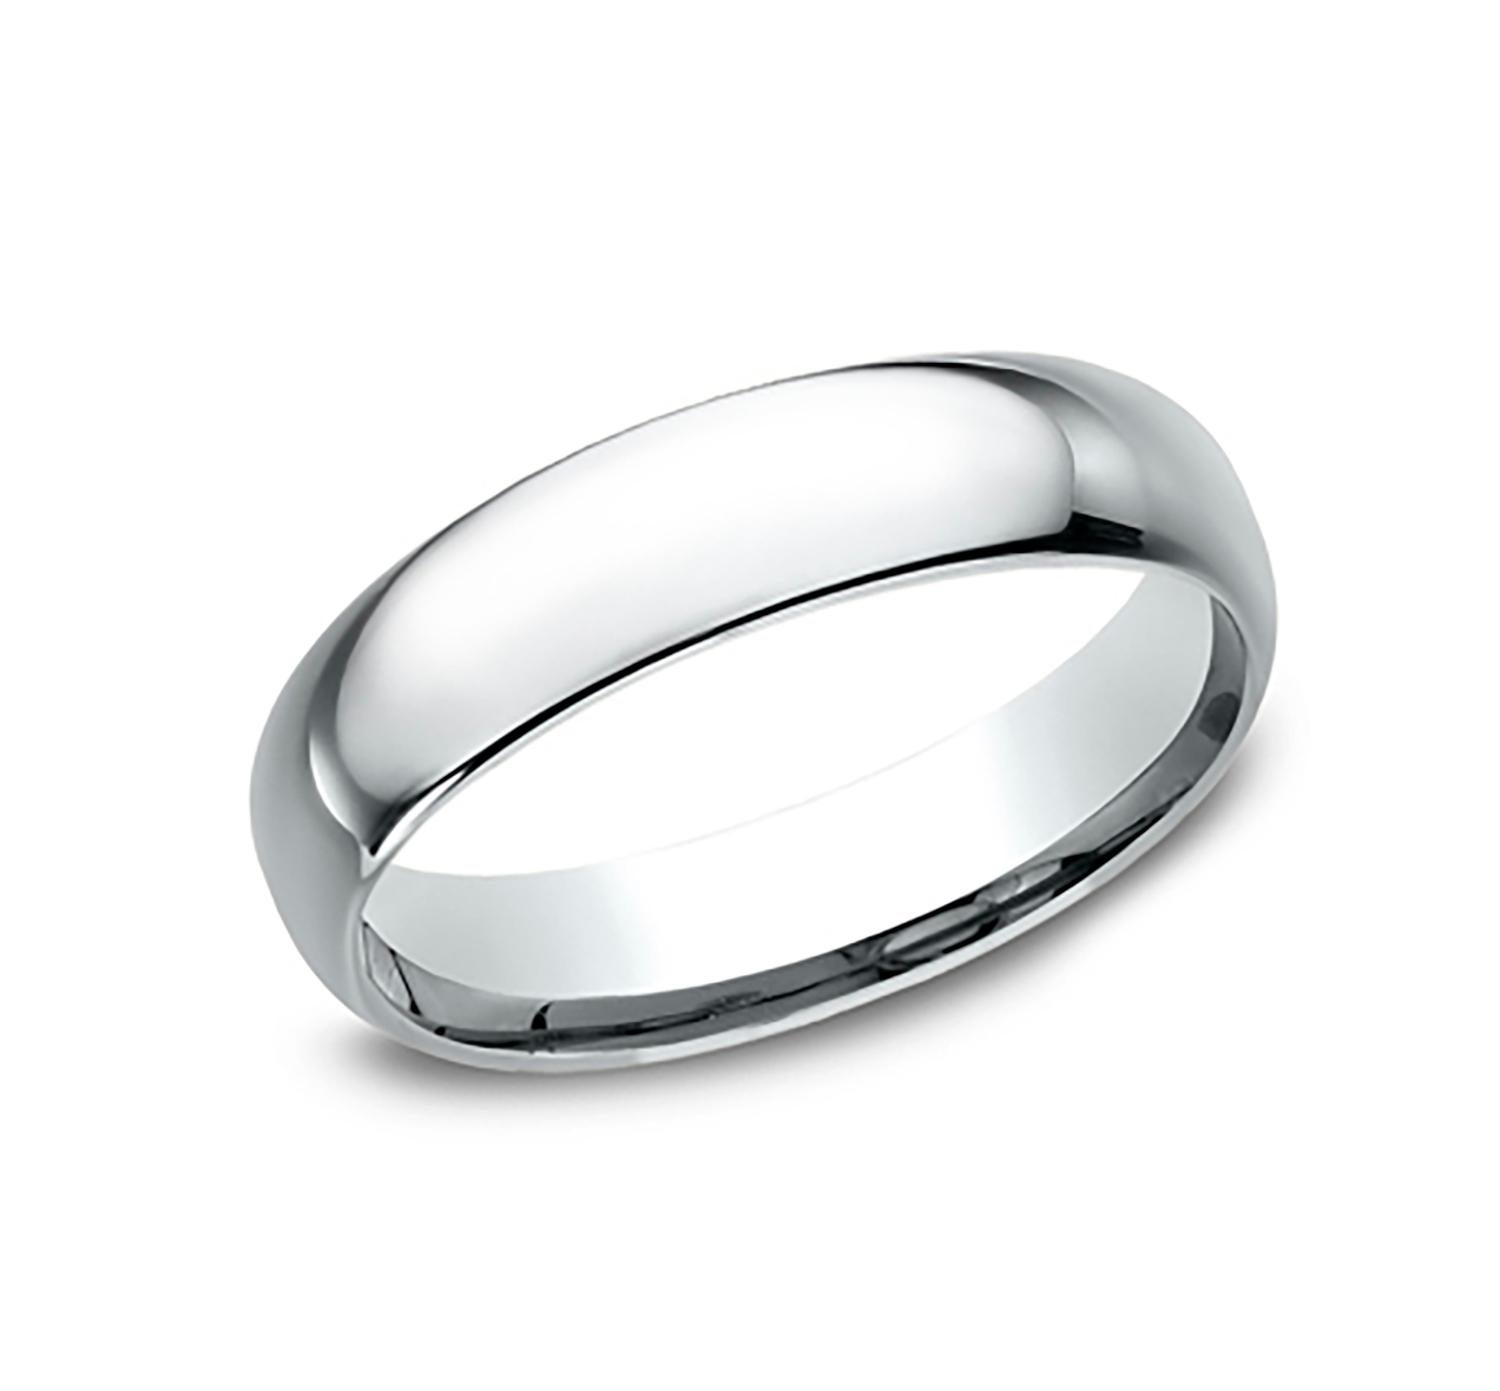 Benchmark wedding band in polished platinum finish. Width 5mm, high dome comfort fit. Custom engraving and finishing available. Size 11 US and resizable upon request. Available in 1/4, 1/2, and 3/4 sizes, for more information please message us on